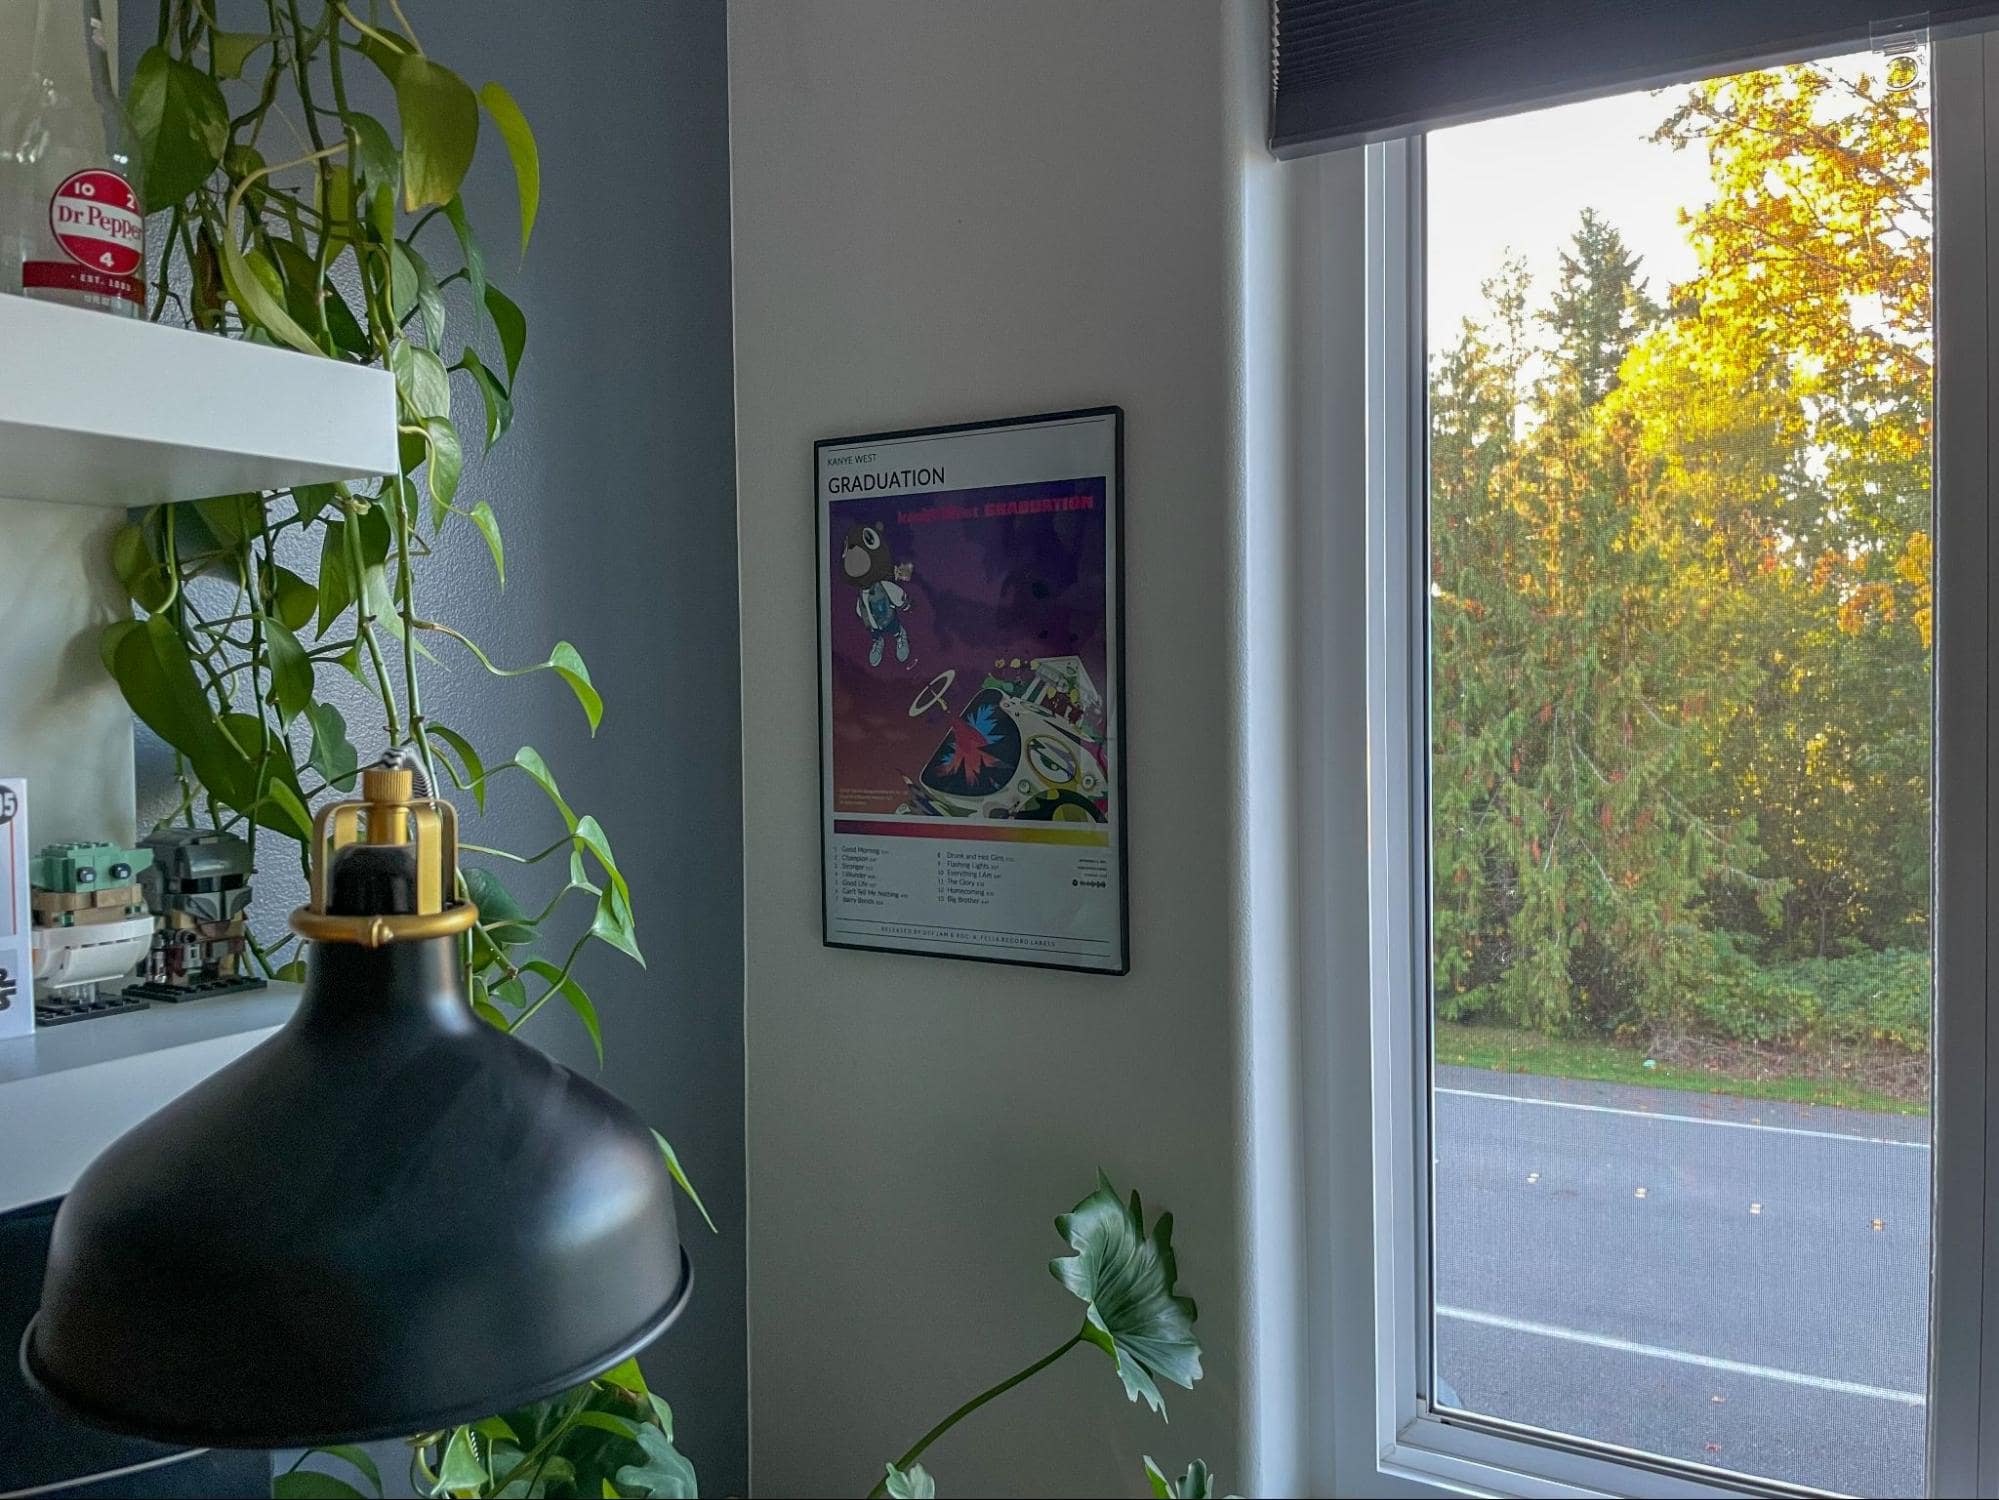 A corner of a room showing a framed poster on a grey wall, a desk lamp, and a window with a view of trees with green foliage